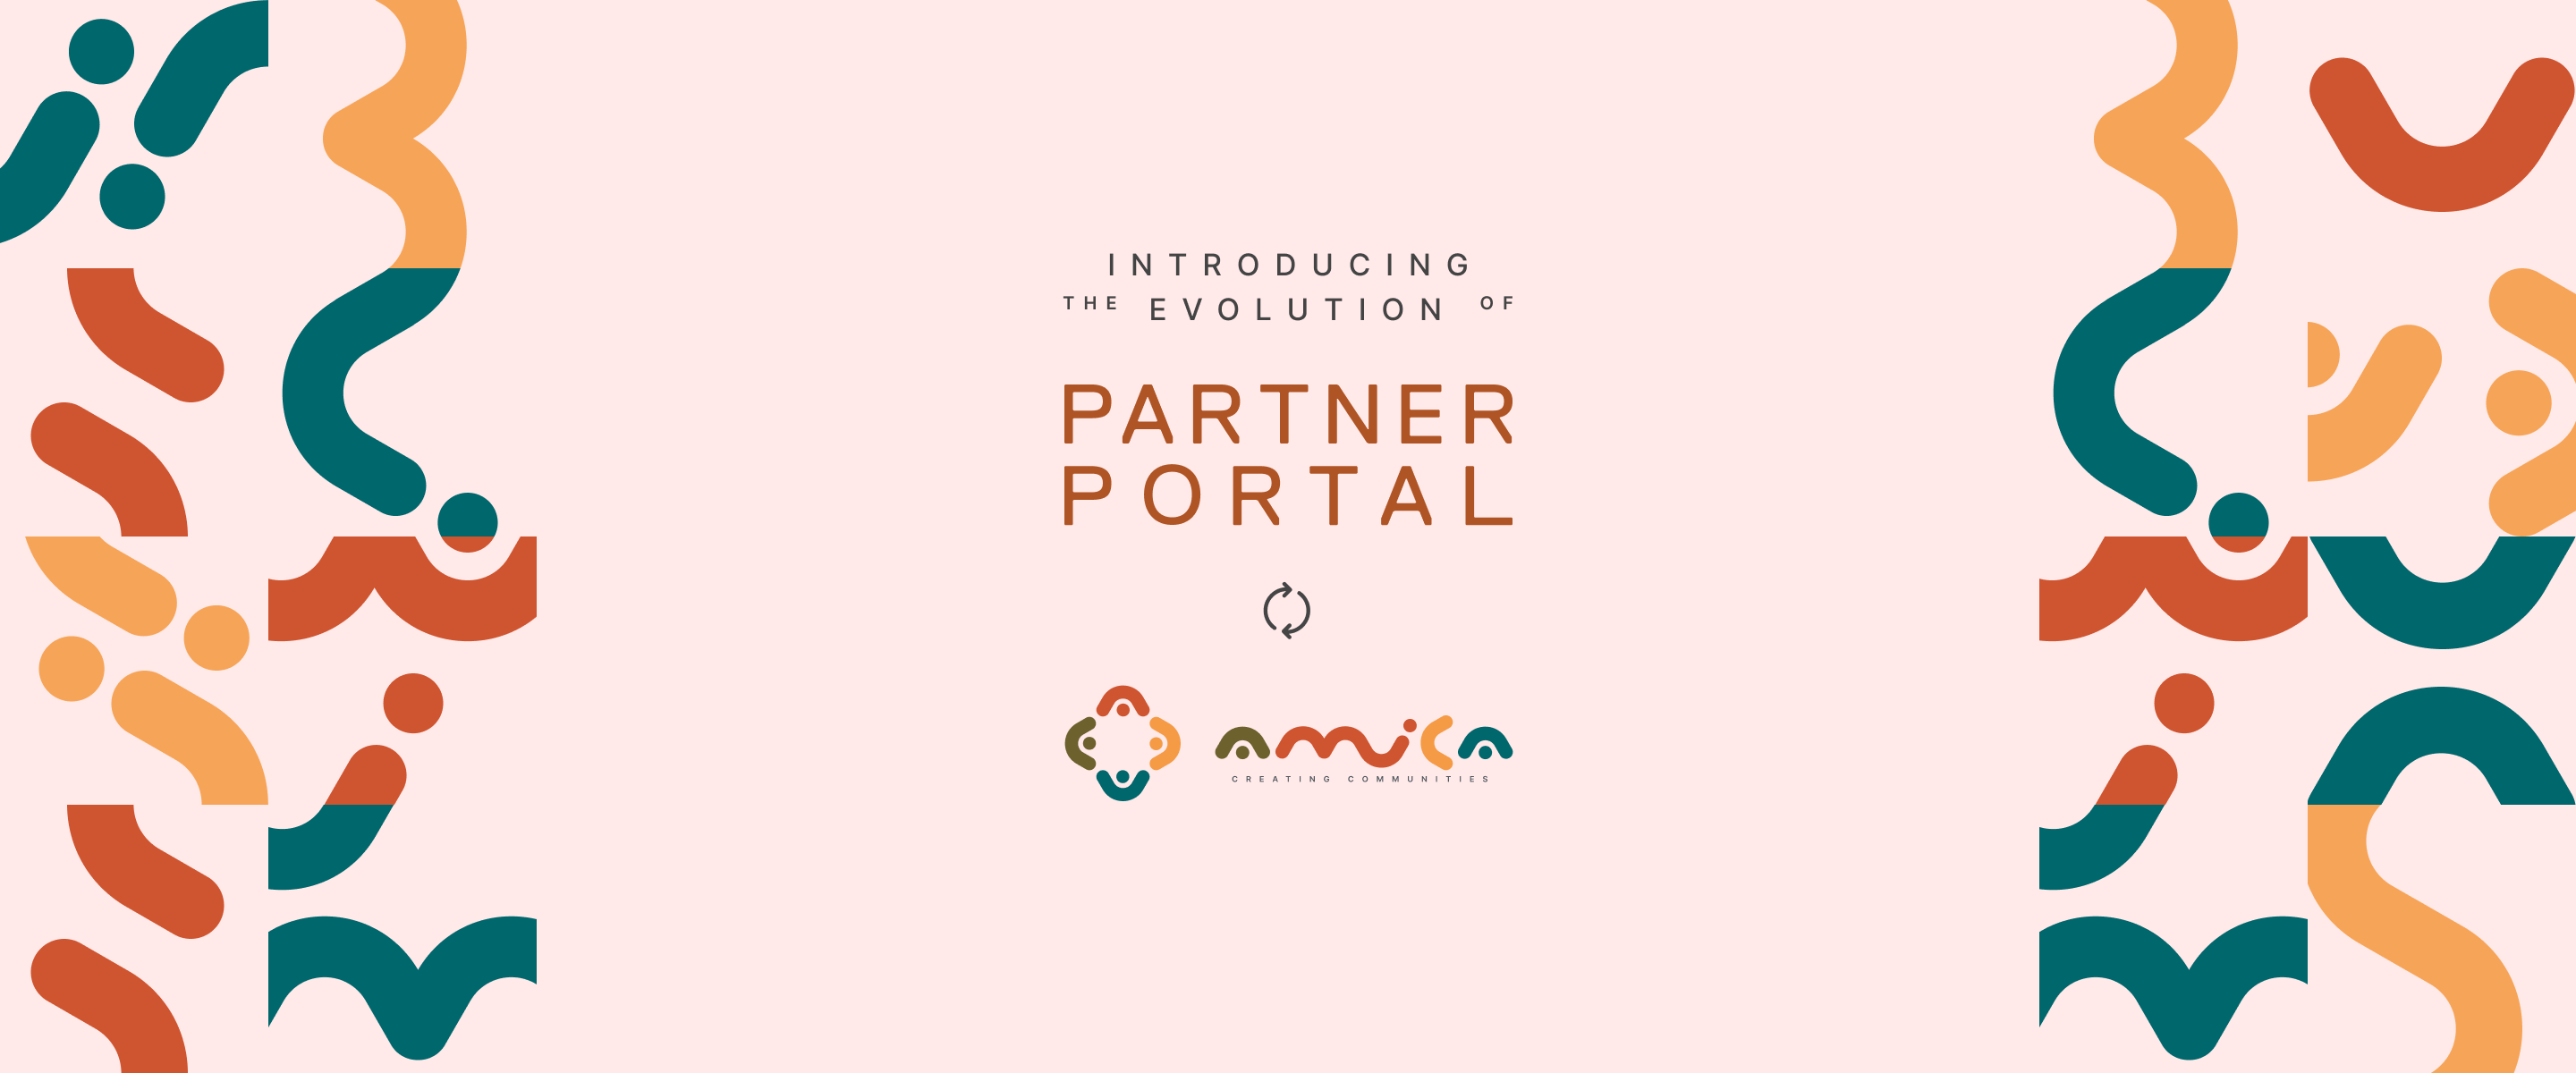 Introducing The Evolution of Partner Portal to Amica